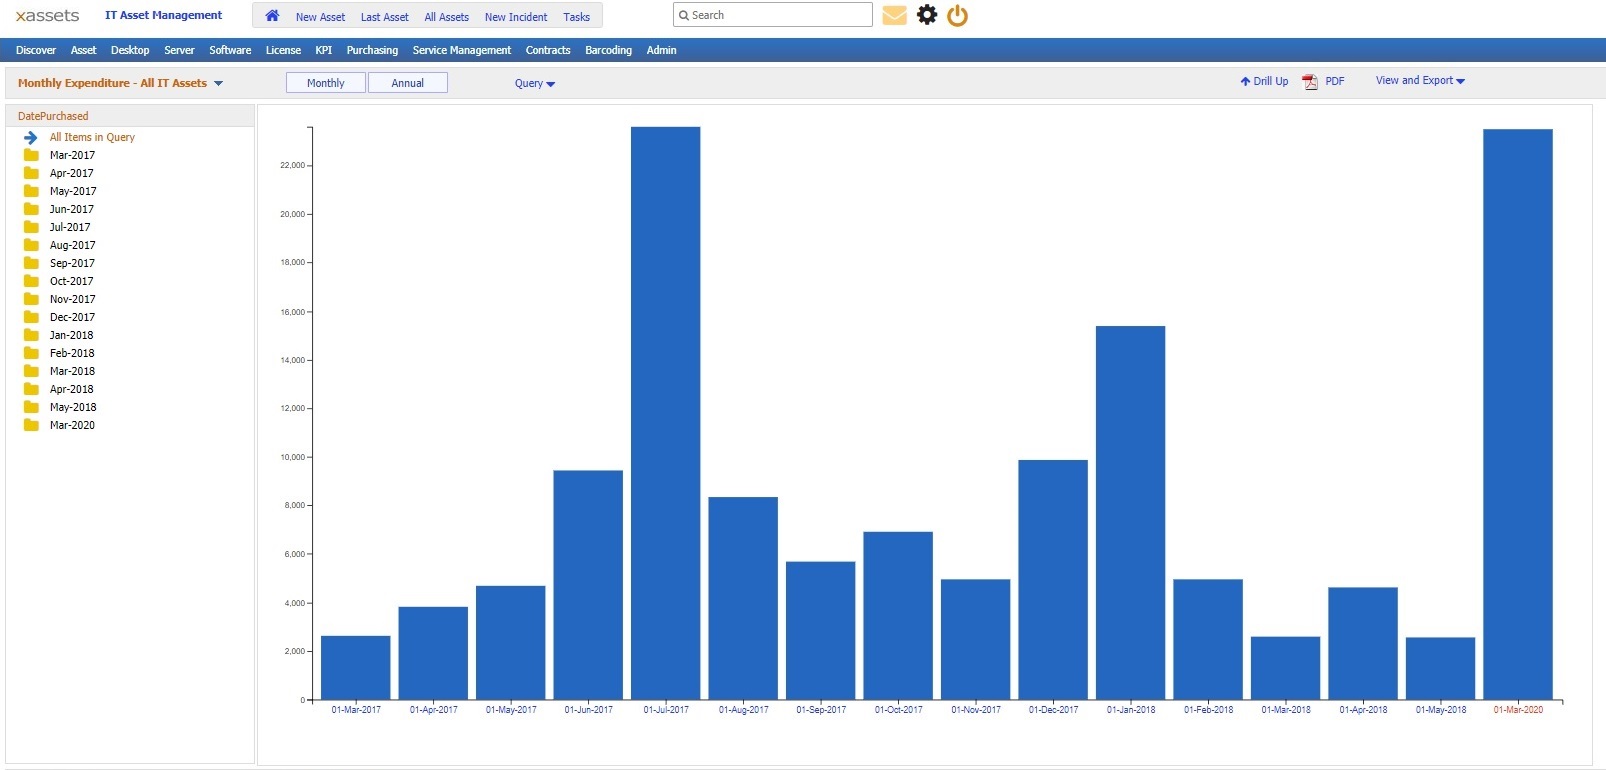 Screenshot of a monthly expenditure report from xAssets IT Asset Management software